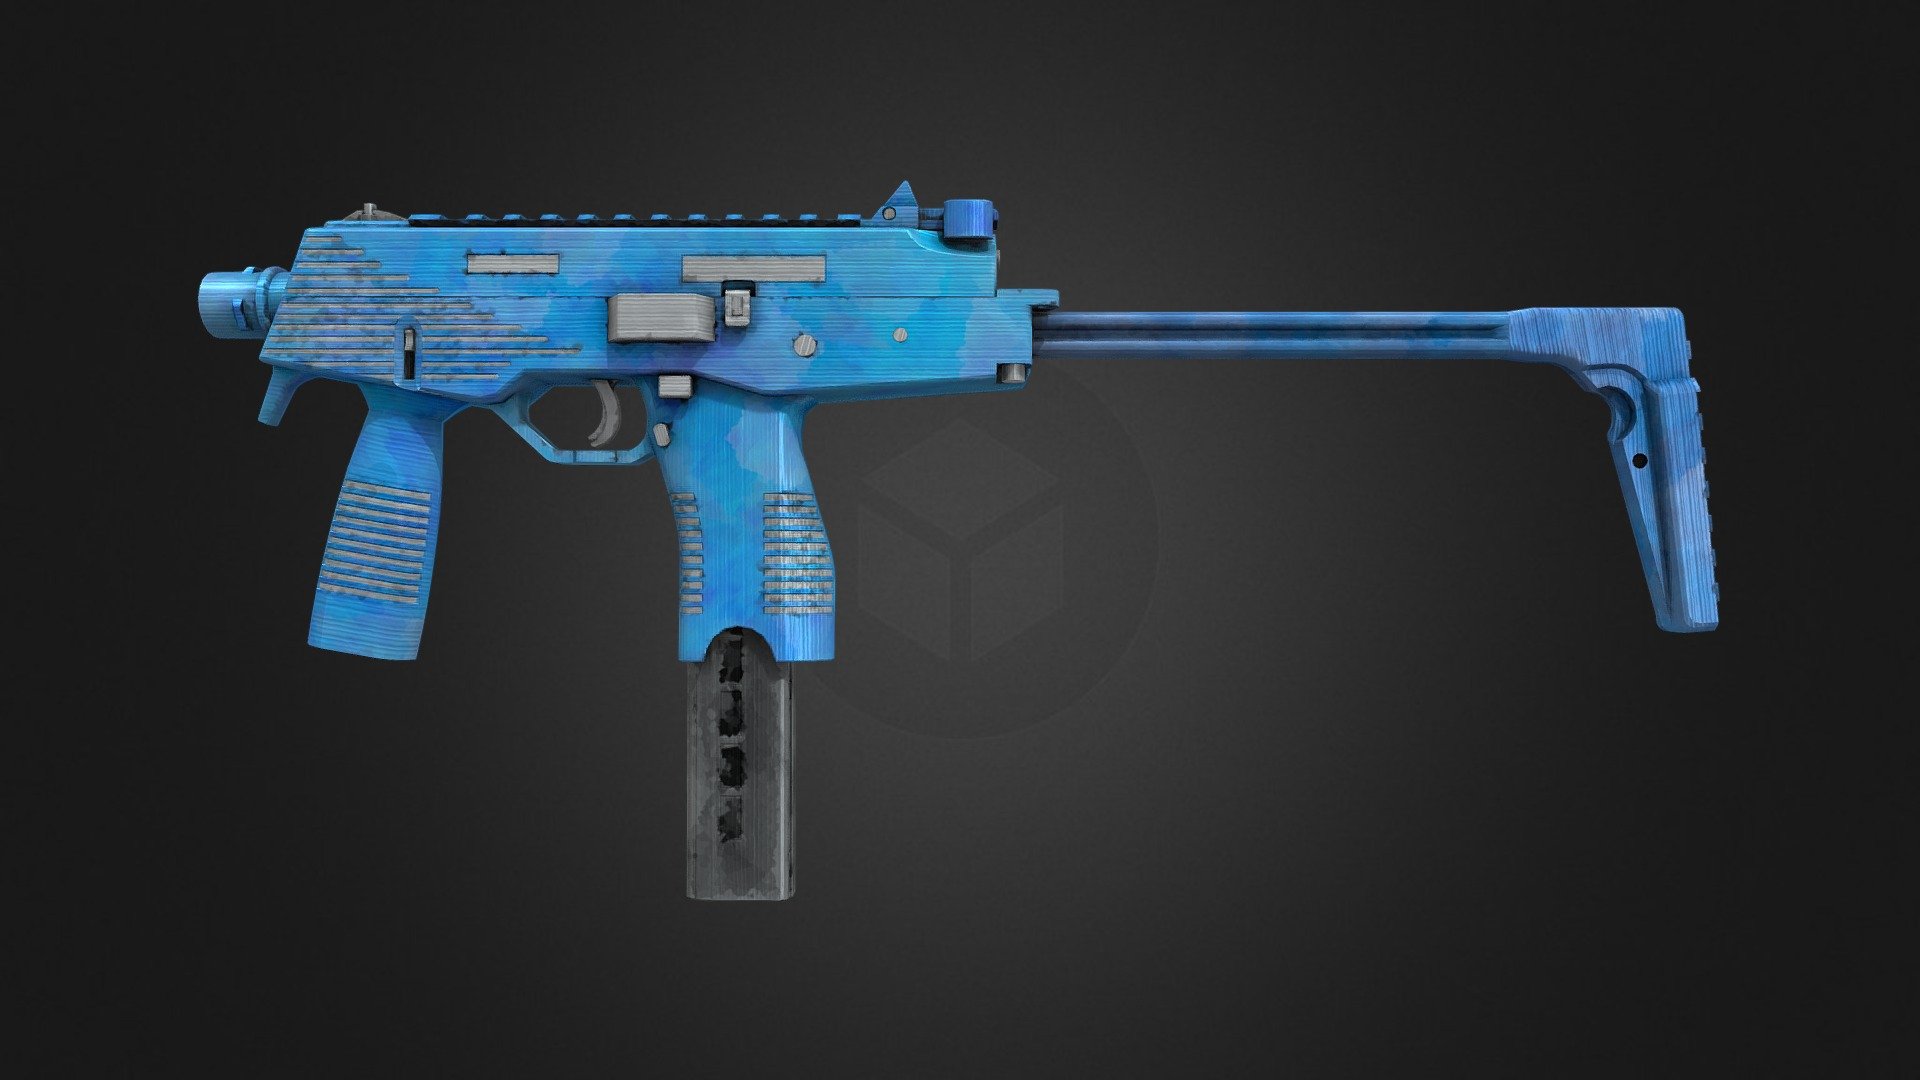 A Custom Paintjob for CSGO.

I do not own the 3D model or the original textures. They belong to Valve.

But the Custom Paintjob was originally created by me.

Support my custom skins on the steam workshop by voting yes. (link below)
https://steamcommunity.com/sharedfiles/filedetails/?id=2594768990 - MP-9 - Sky Camo - 3D model by AnshiNoWara 3d model